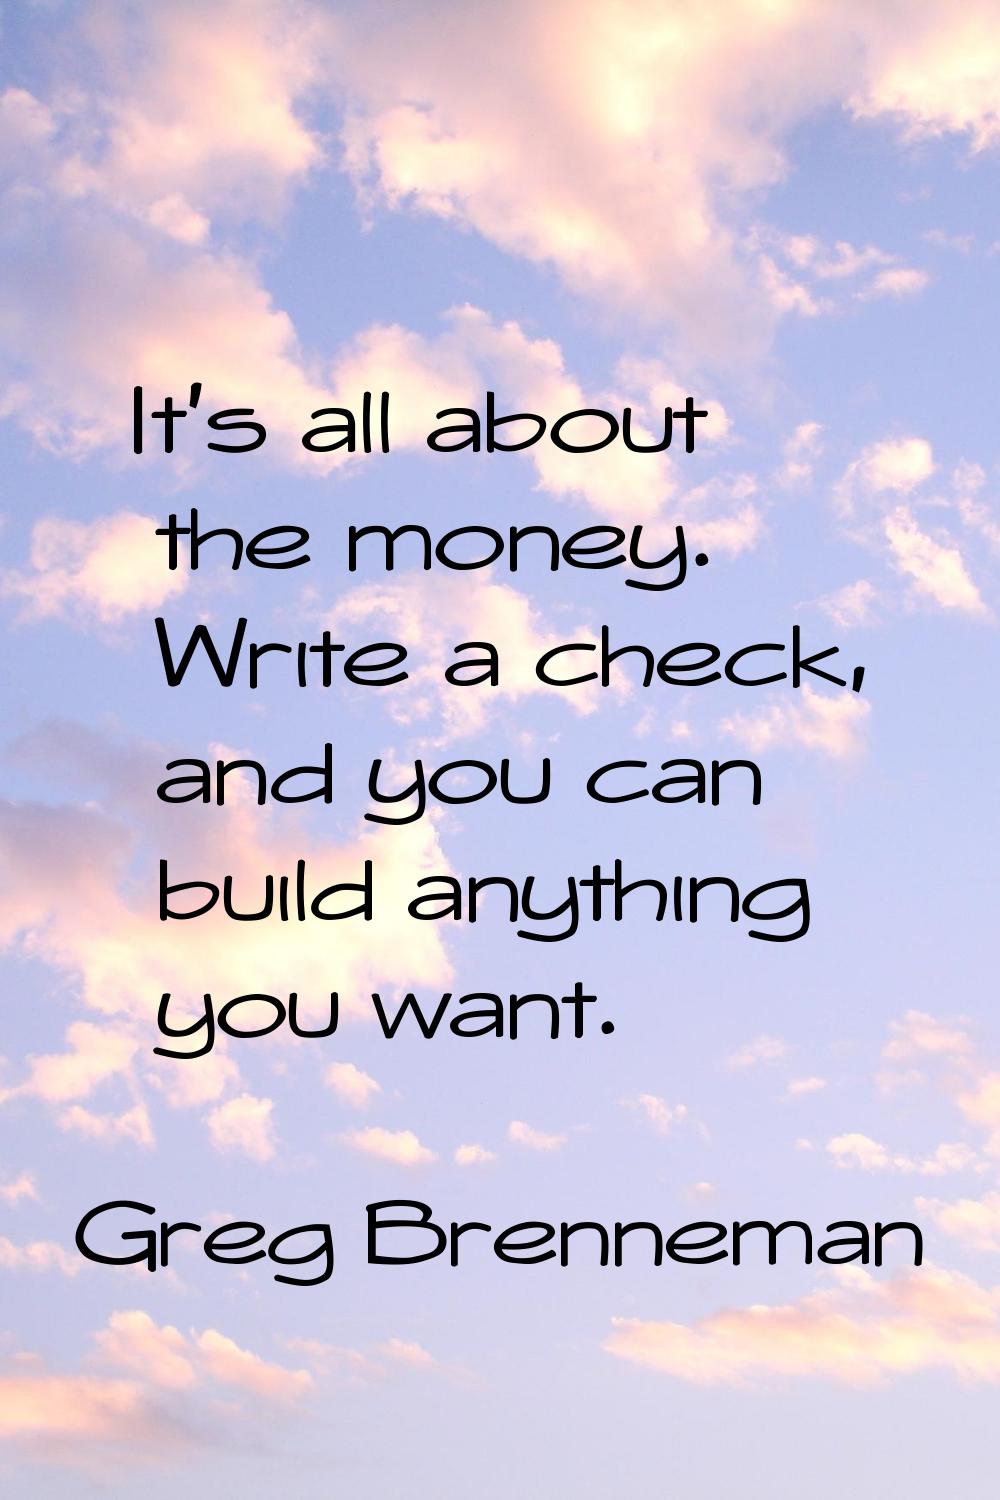 It's all about the money. Write a check, and you can build anything you want.